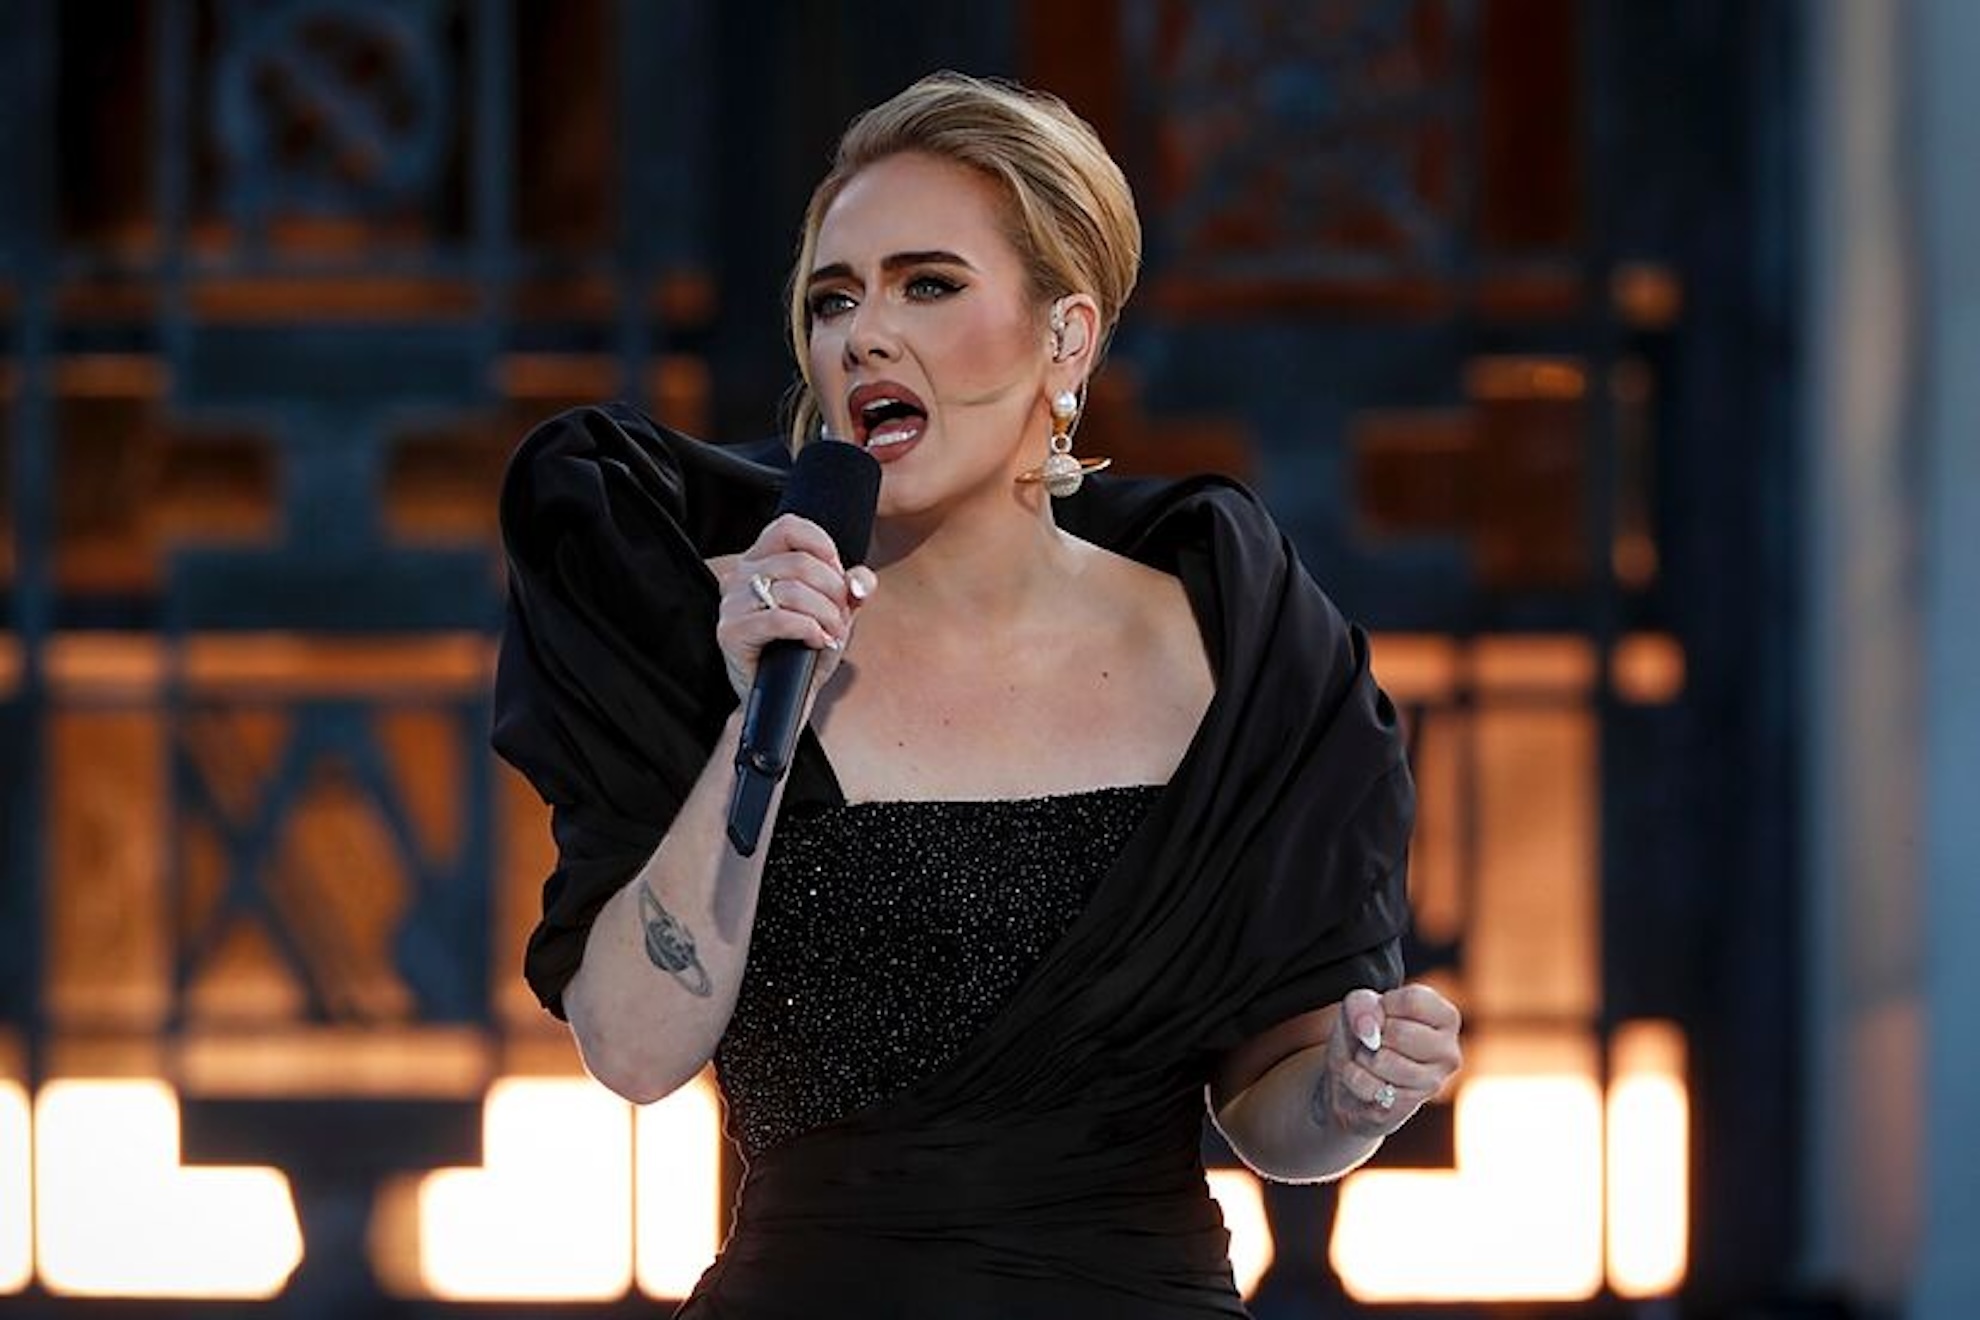 Adele reveals story behind infamous NBA meme and responds to lip filler rumors